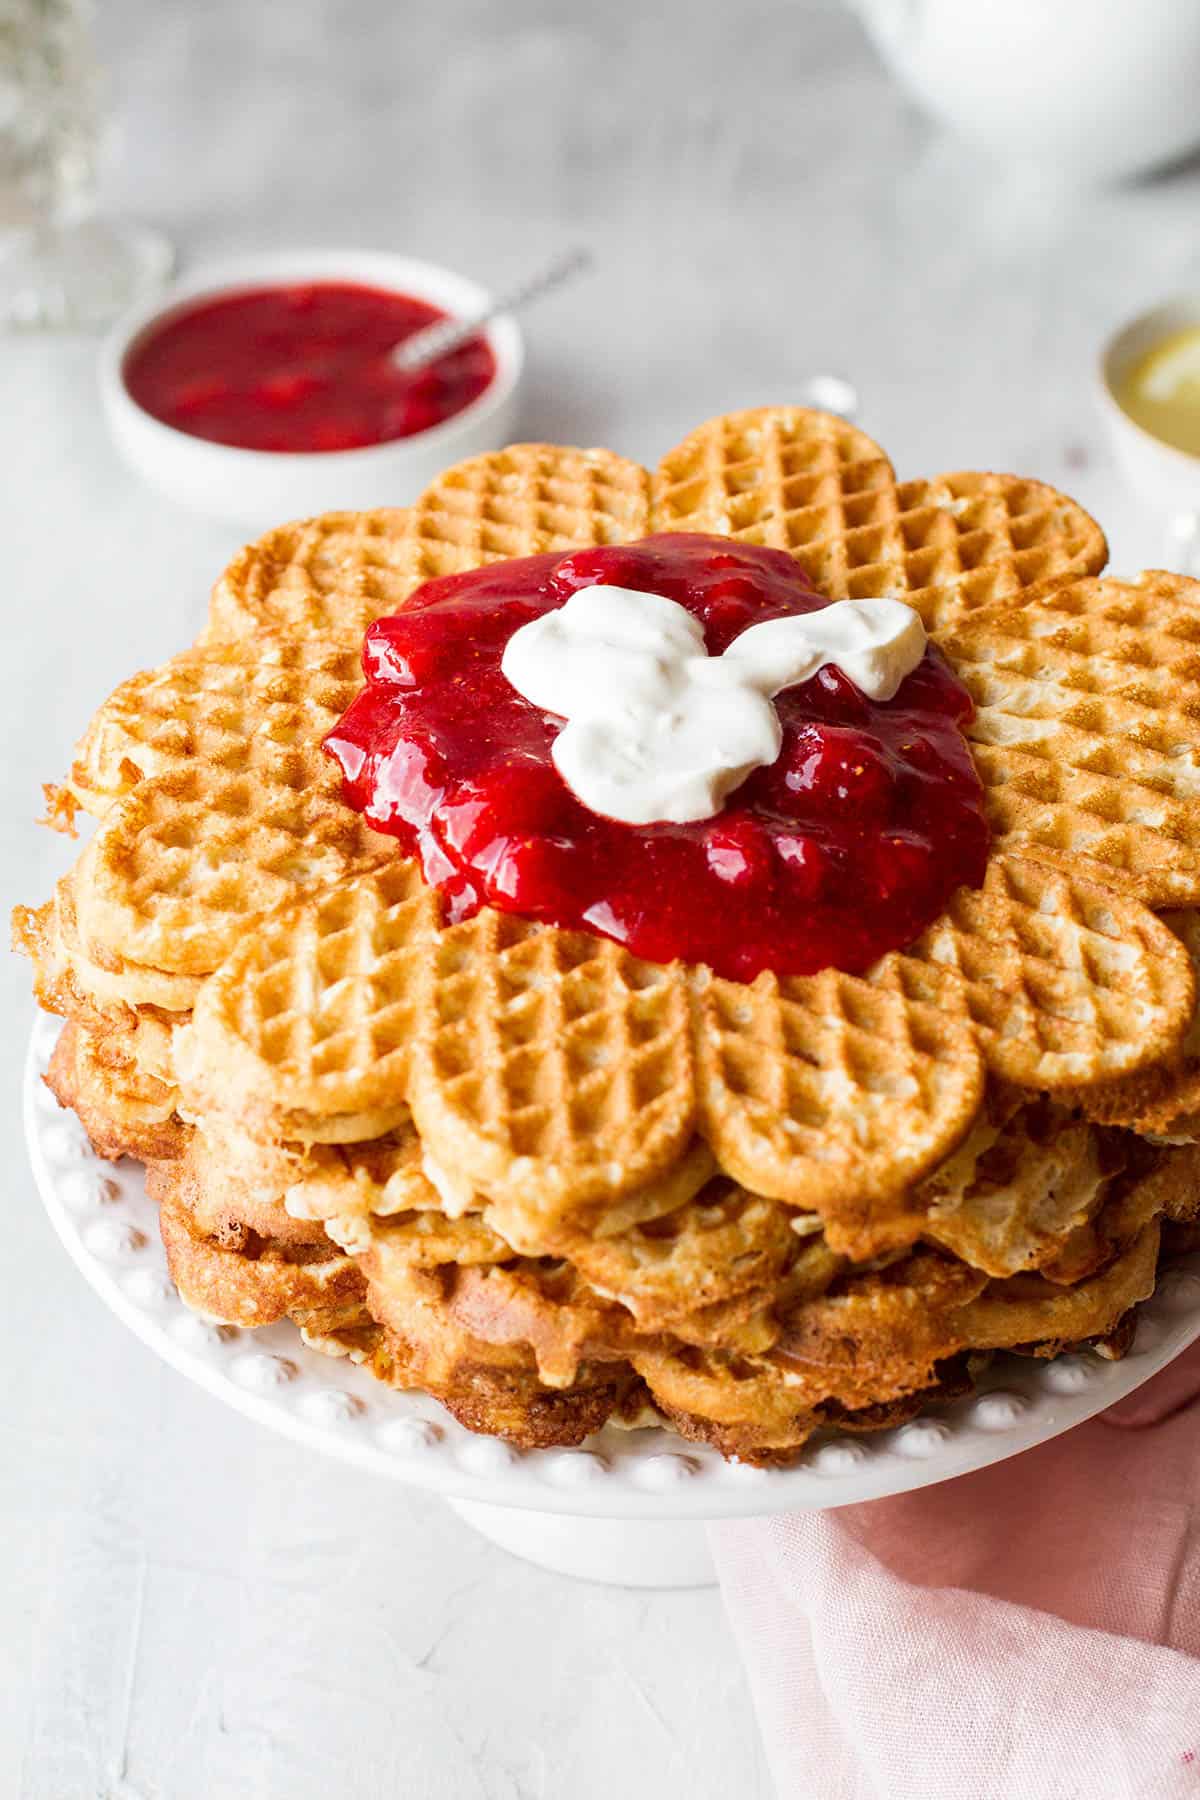 A stack of heart shaped waffles with strawberry jam and sour cream on the top.